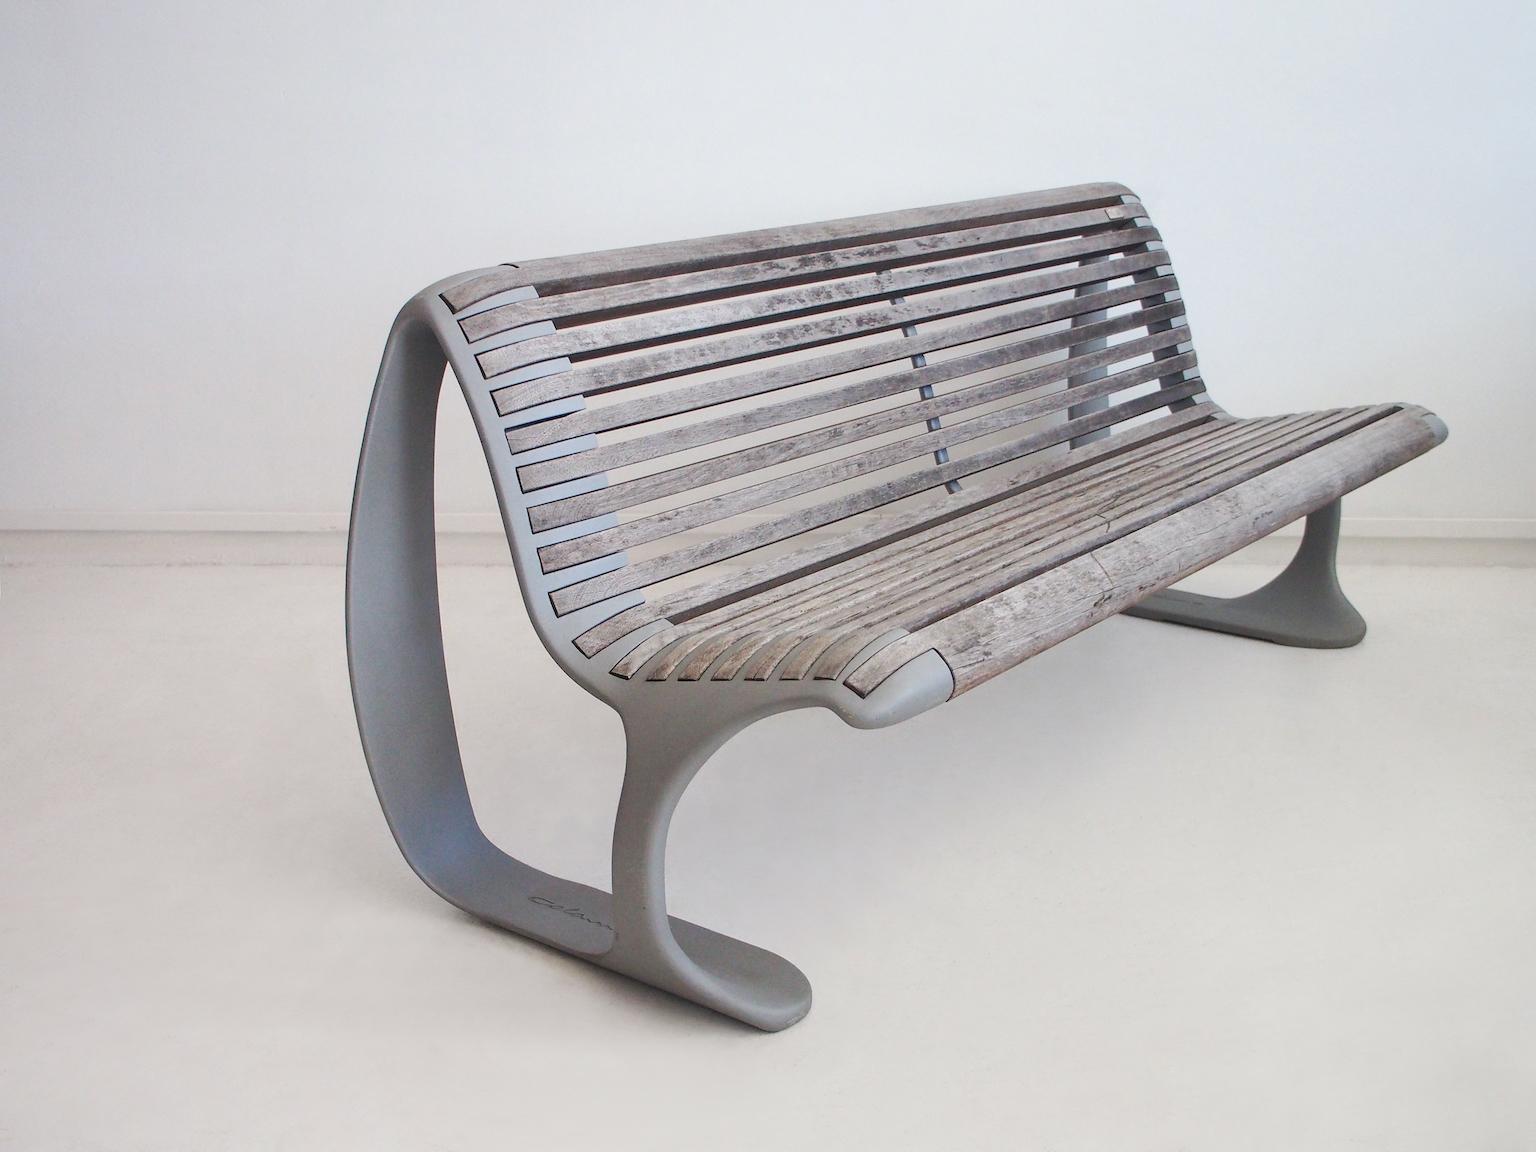 Outdoor bench designed by Luigi Colani in 2002 and produced by Westeifel Werke. Organically shaped cast aluminum frame, seat and back made of wooden slats. Signs of age and use-related wear.

Luigi Colani (1928 - 2019) was a German Industrial